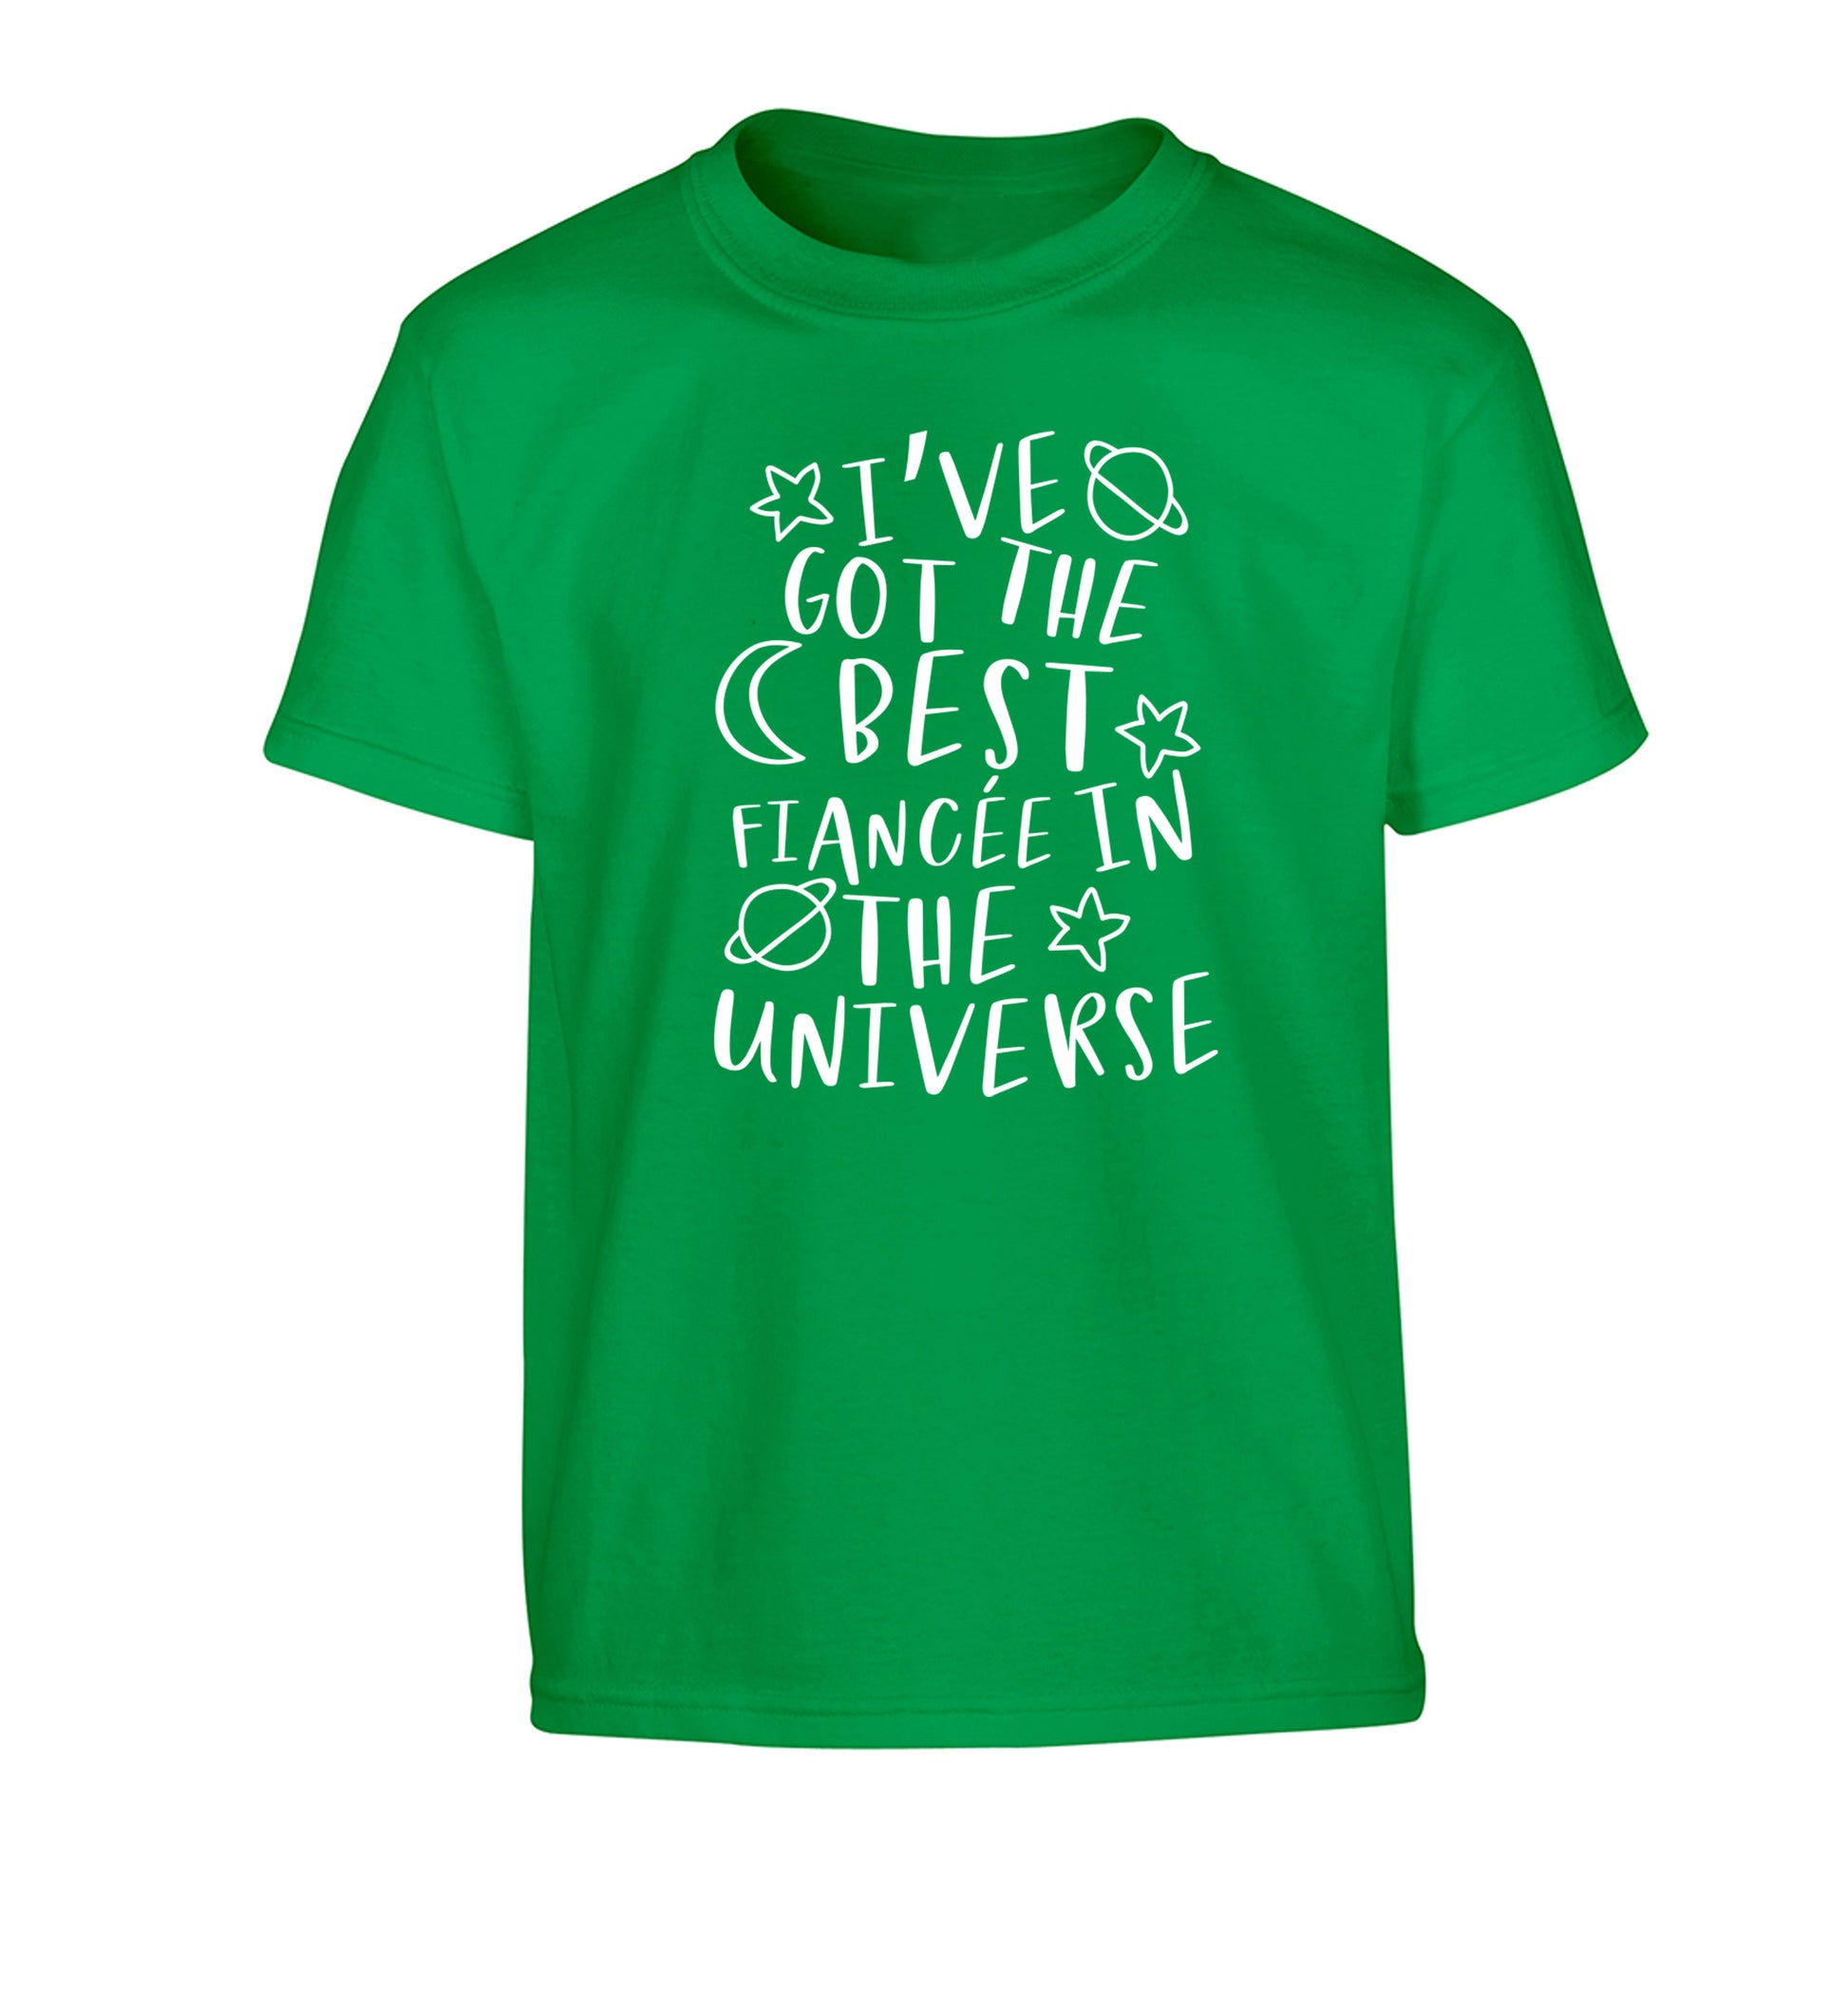 I've got the best fiancee in the universe Children's green Tshirt 12-13 Years